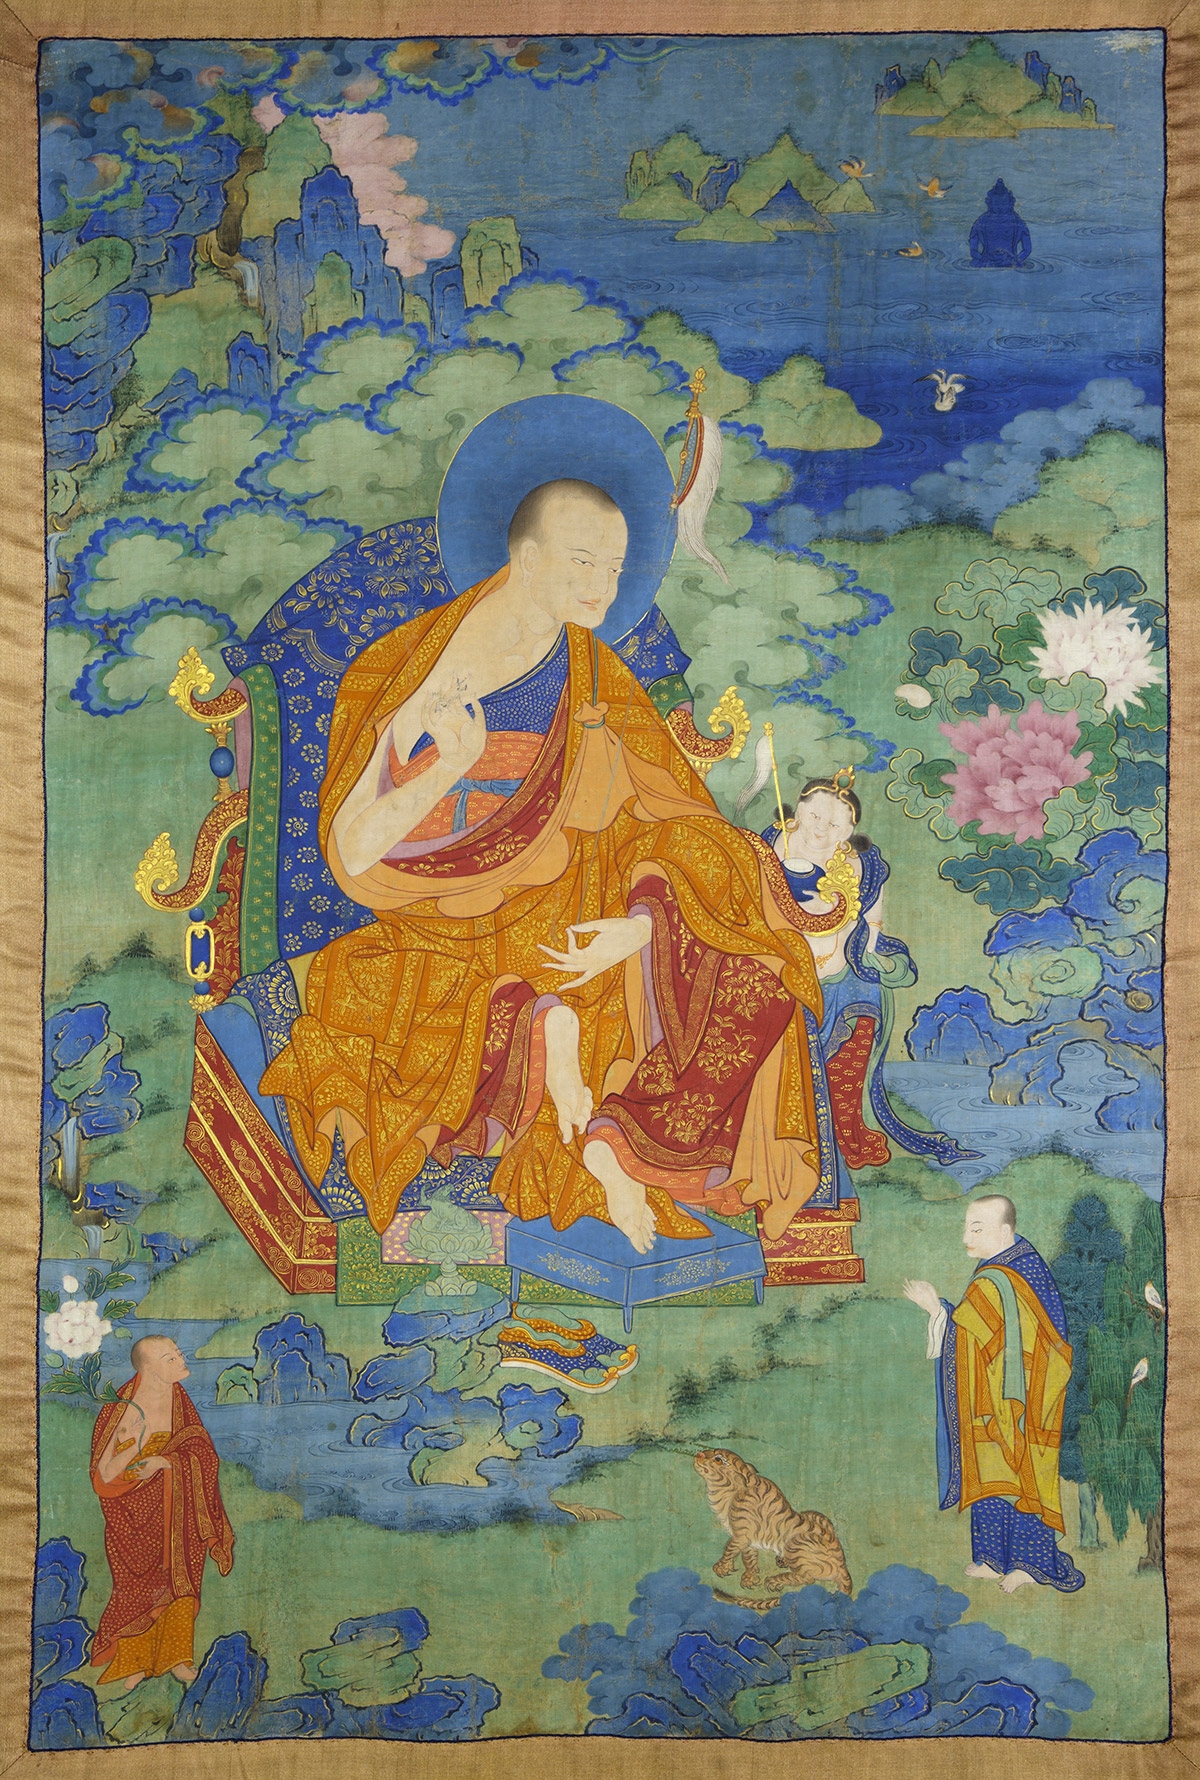 Vanavasin Arhat. 17th century. Possibly Kham (East Tibet). Tradition: Gelug. Pigments on cloth. MU-CIV/MAO "Giuseppe Tucci," inv. 924/757. Placement as indicated on verso: 5th from right. Image courtesy of the Museum of Civilisation/Museum of Oriental Art "Giuseppe Tucci," Rome.